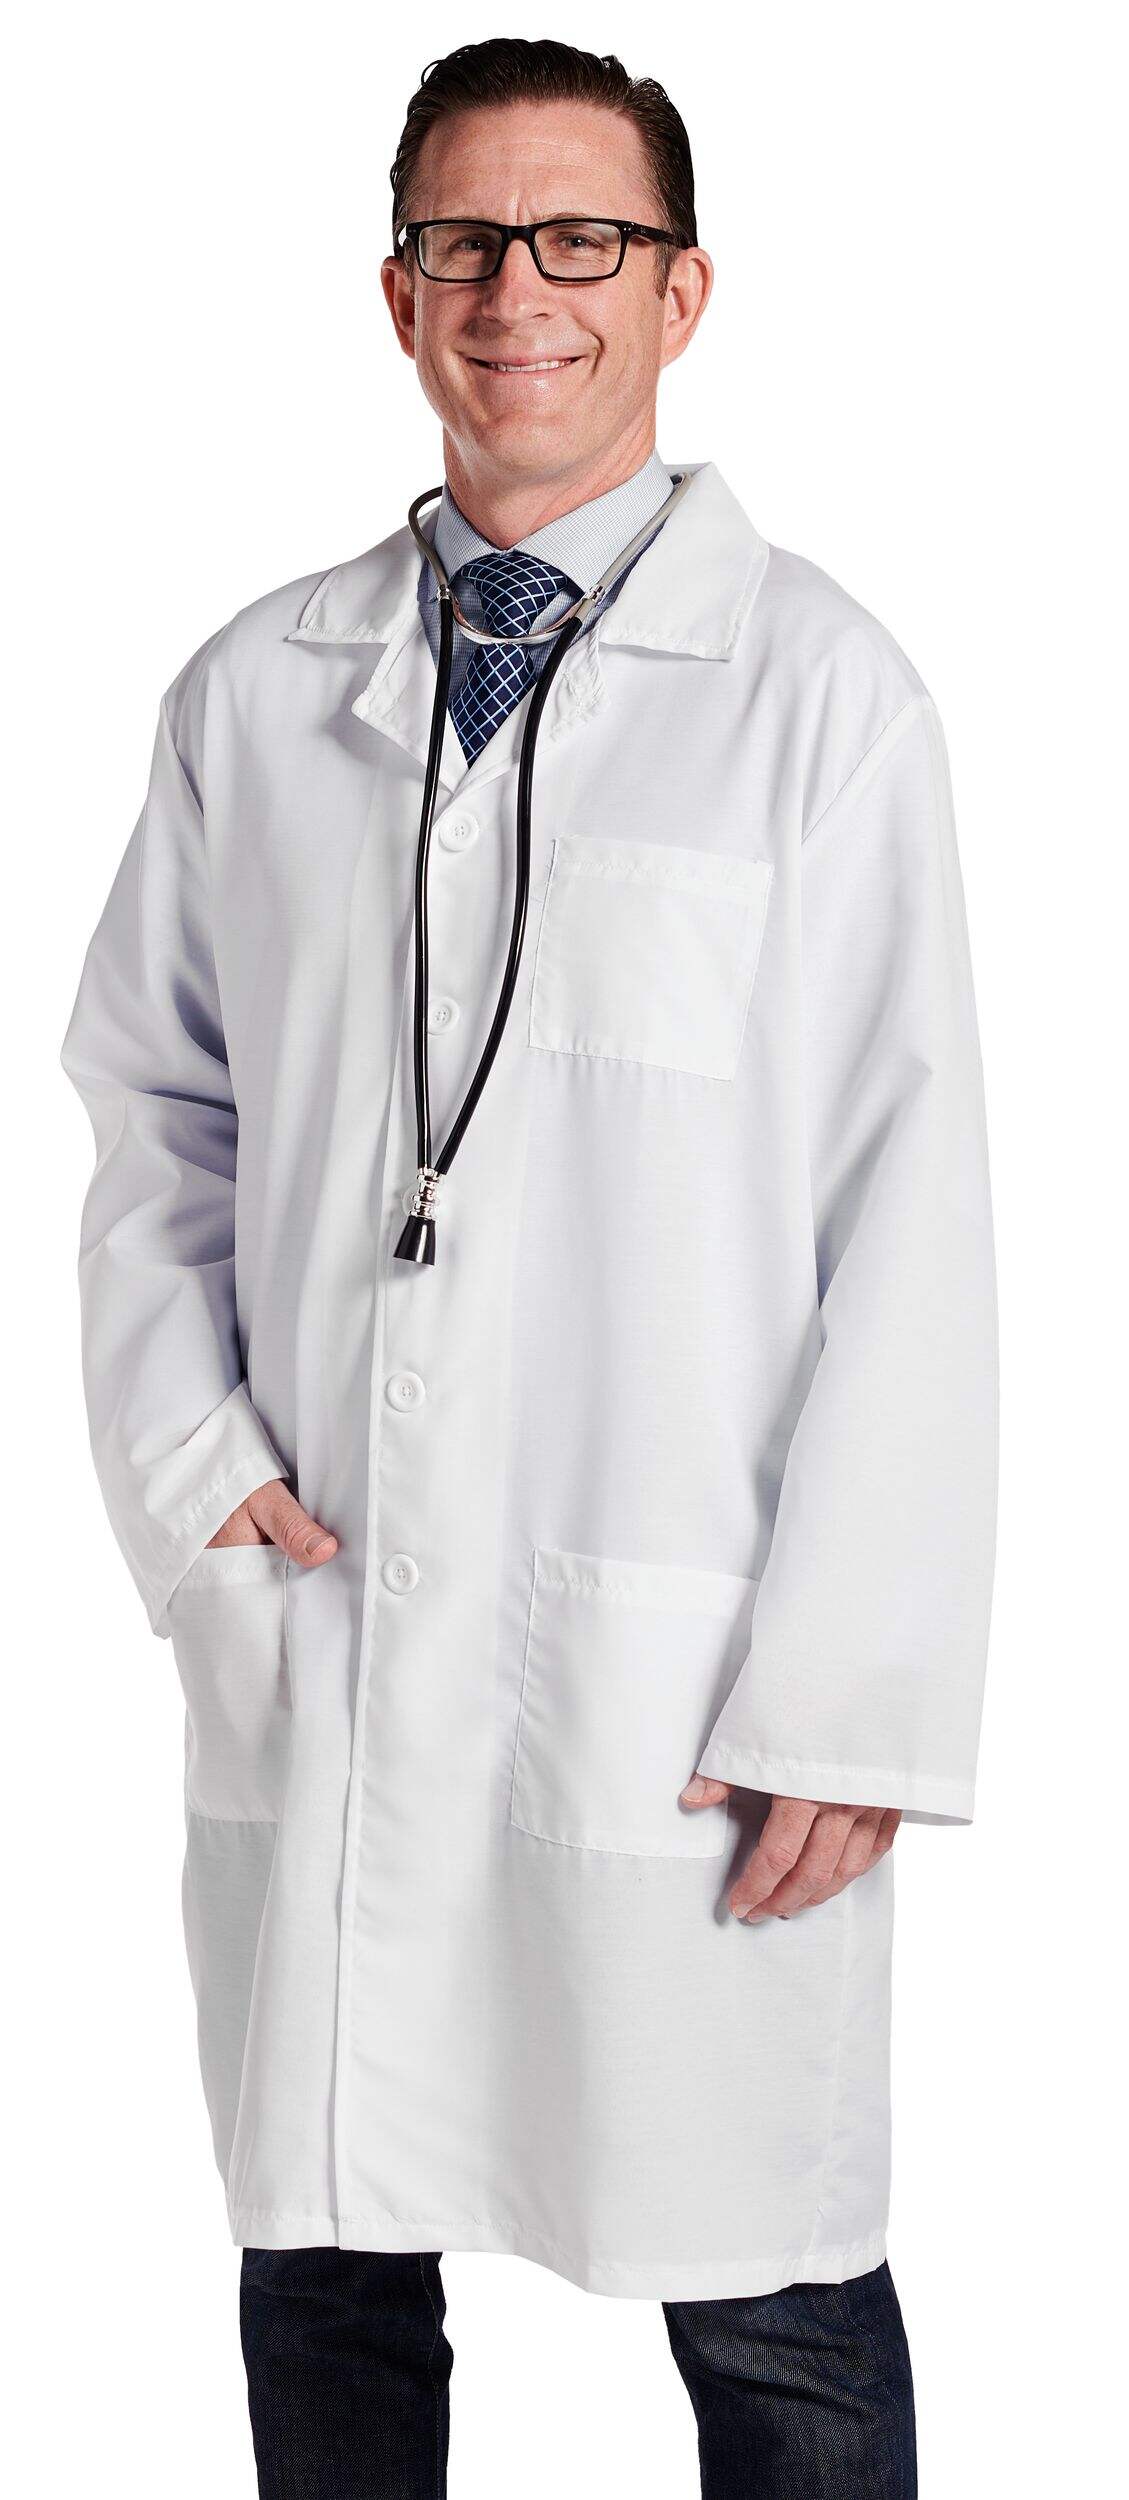 Doctor Lab Coat, White, One Size, Wearable Costume Accessory for ...